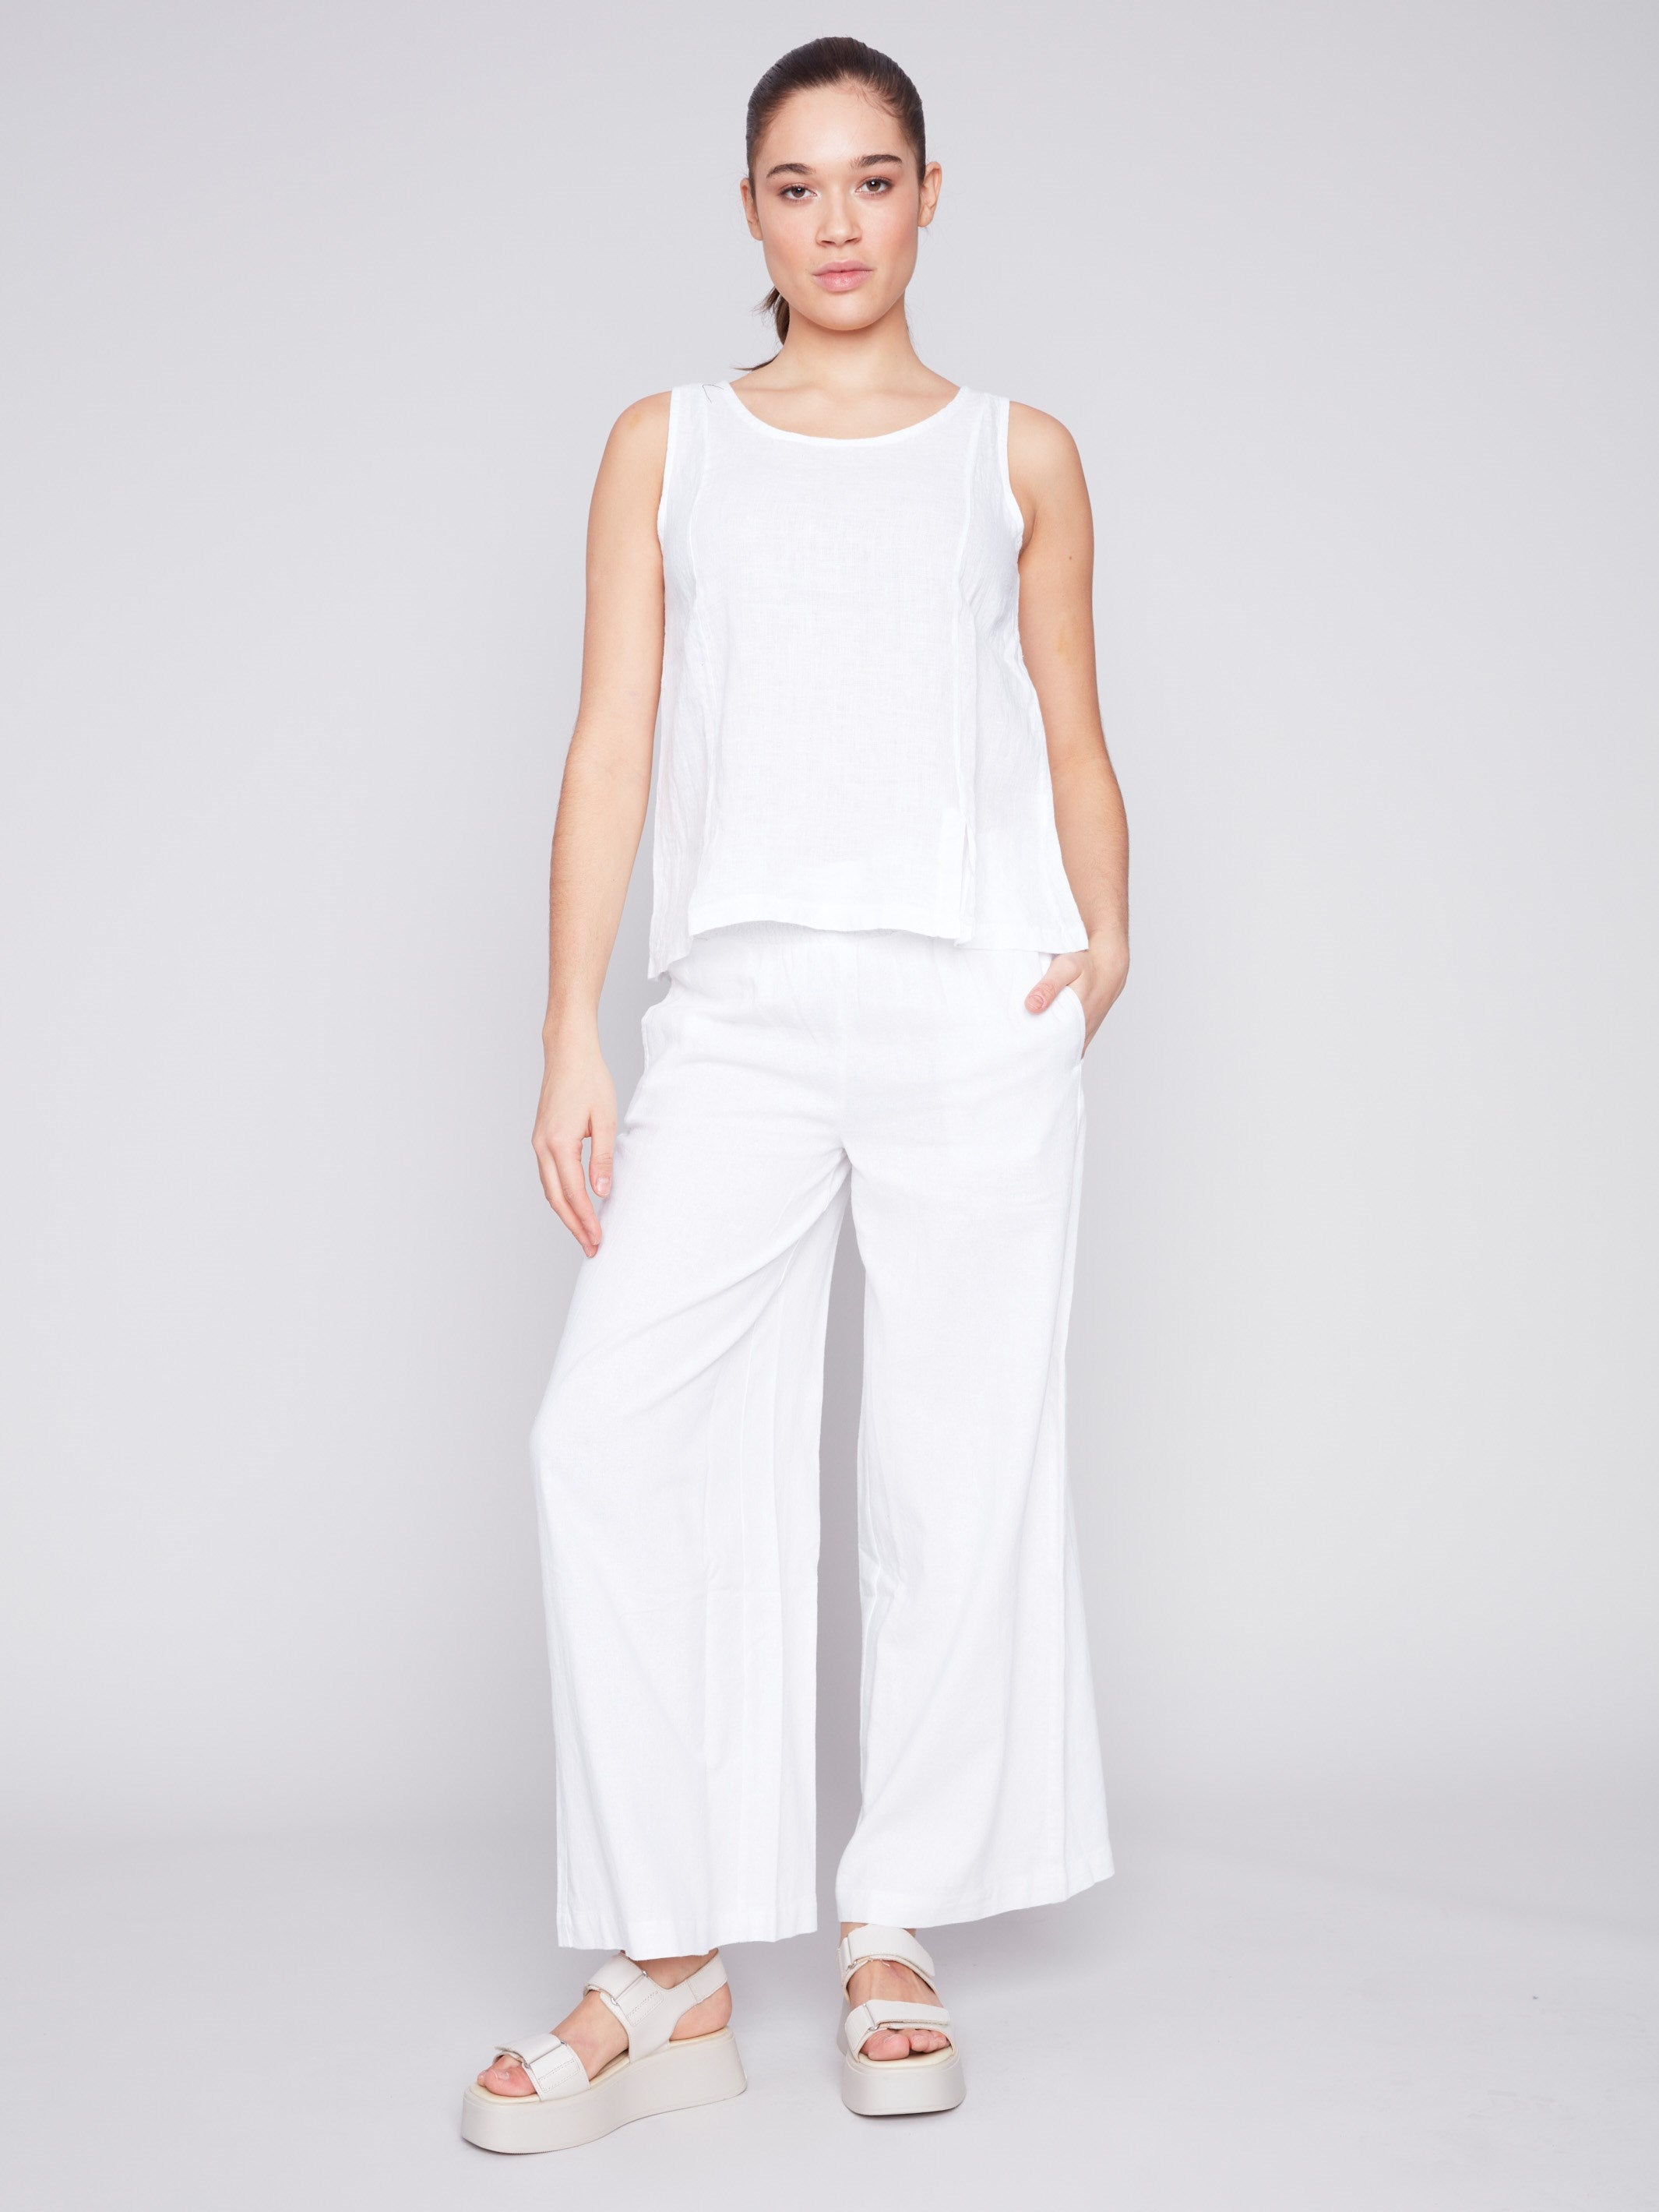 Sleeveless Linen Top with Slit - White - Charlie B Collection Canada - Image 2